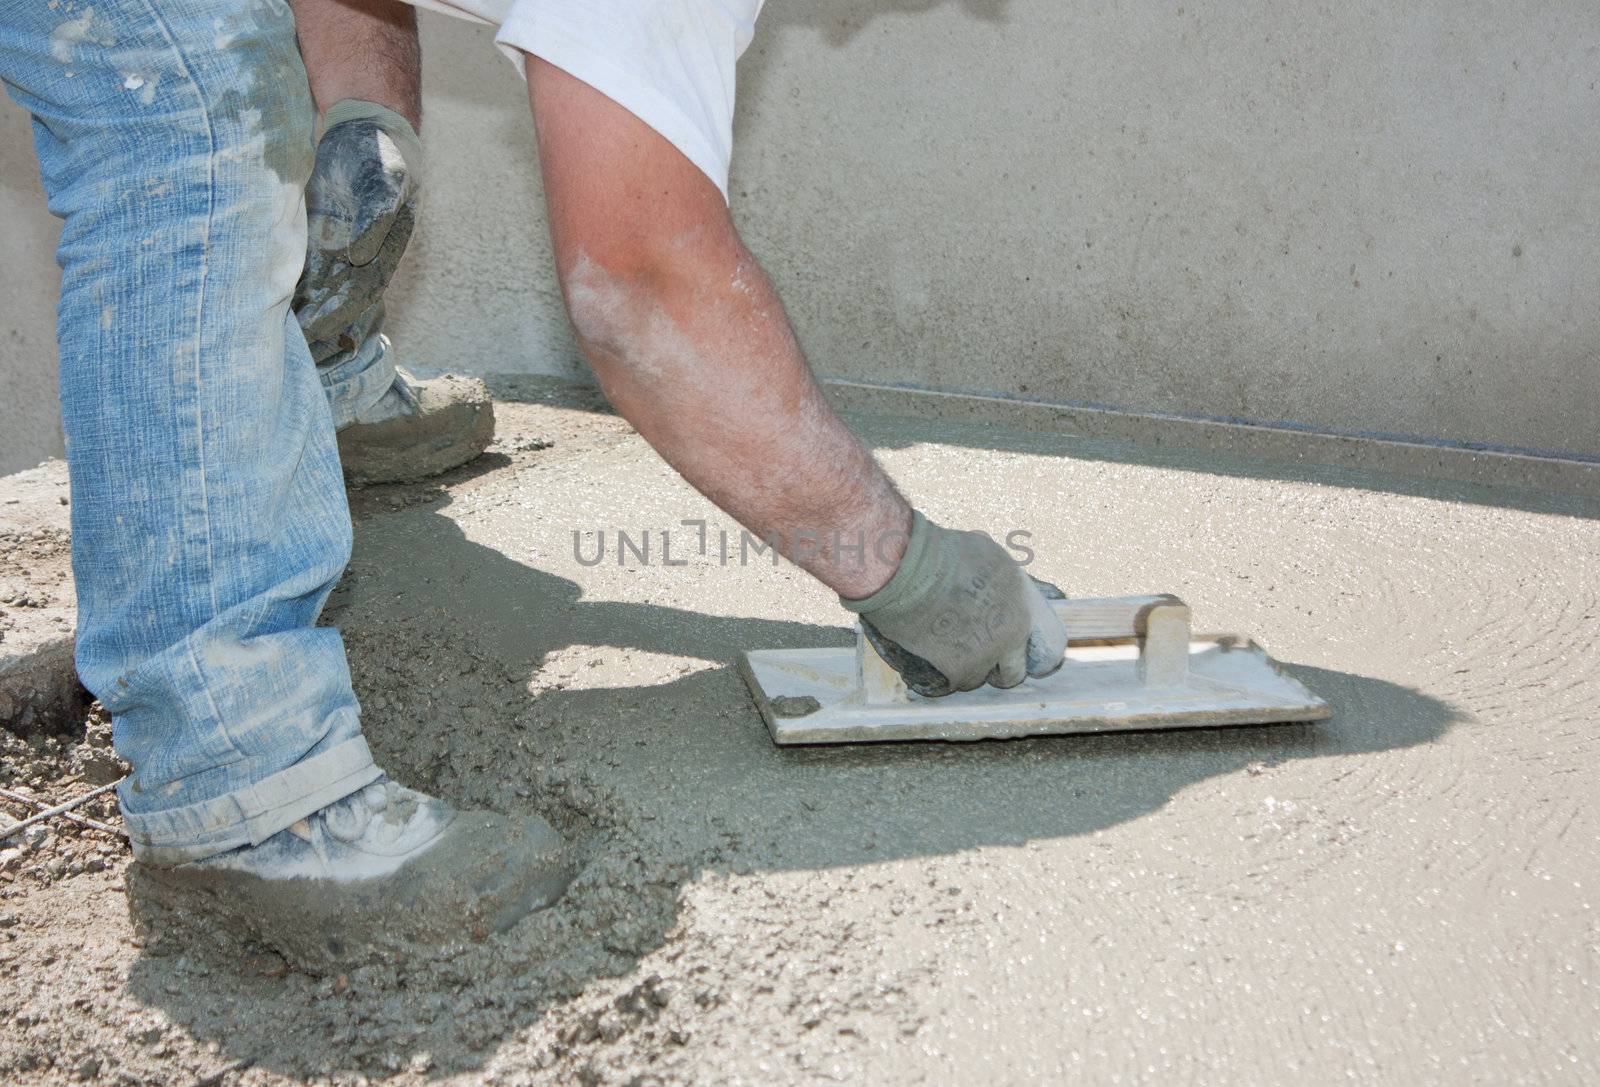 Mason building a screed coat cement